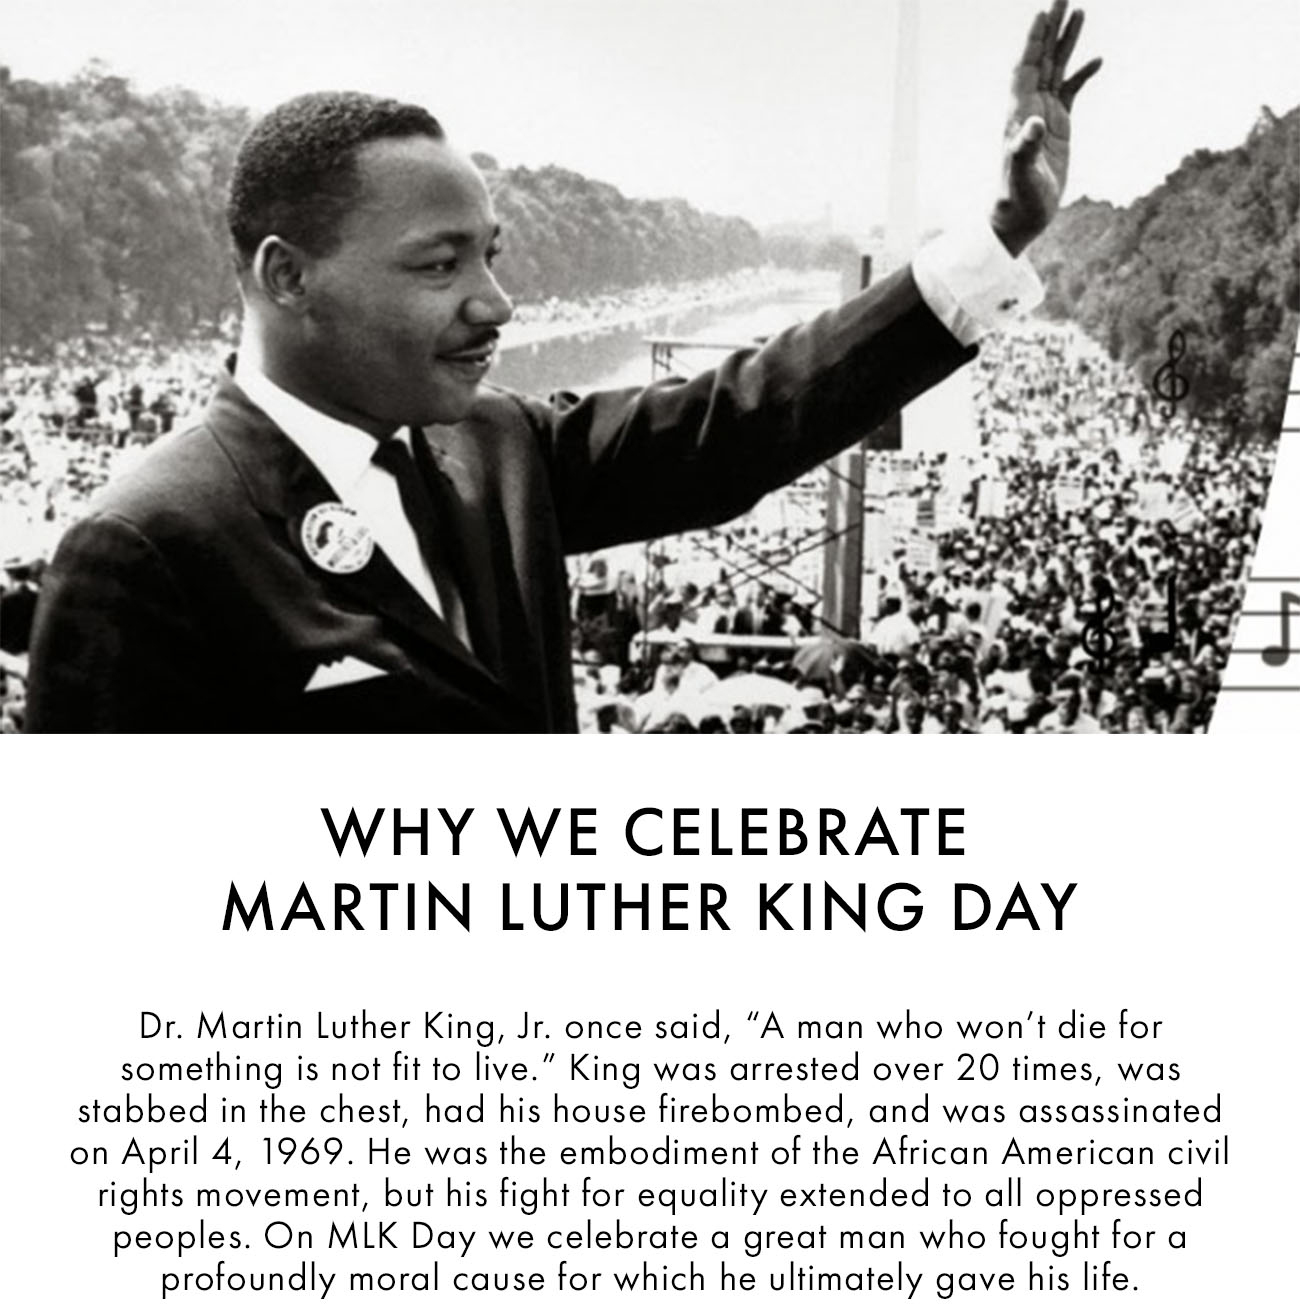 Why We Celebrate Martin Luther King Day